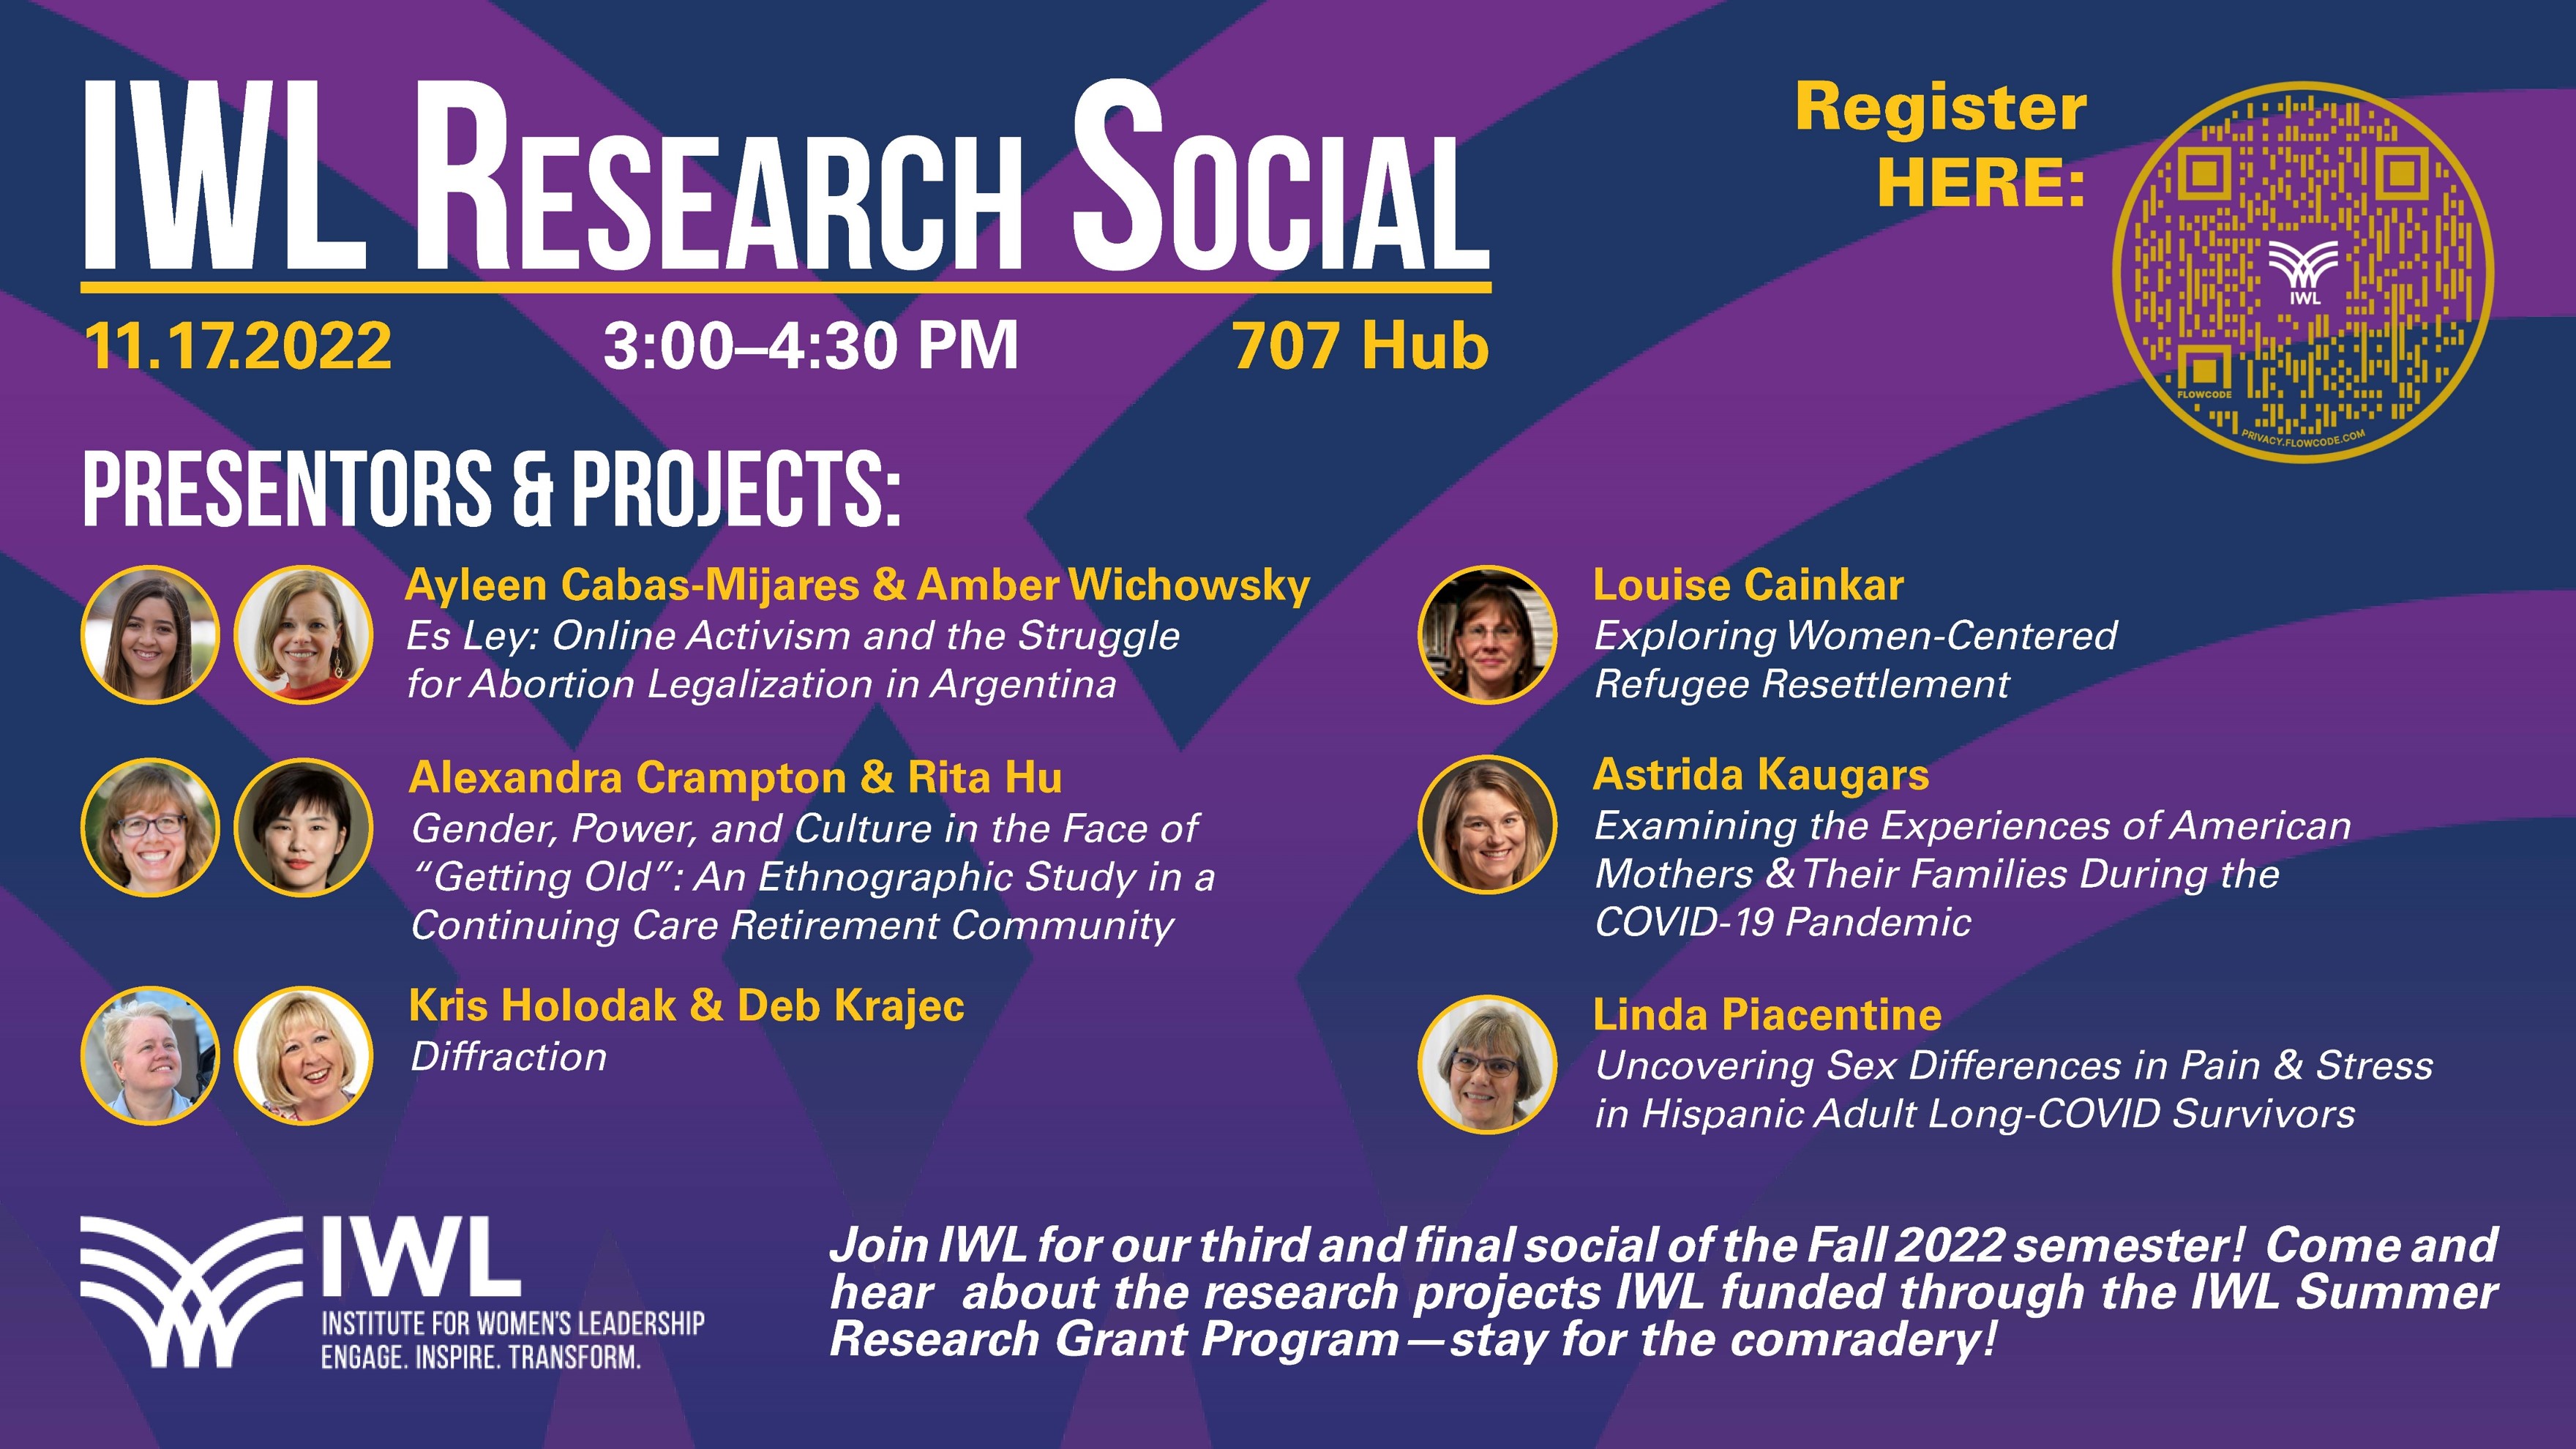 IWL Research Social flyer (2022-11-17)